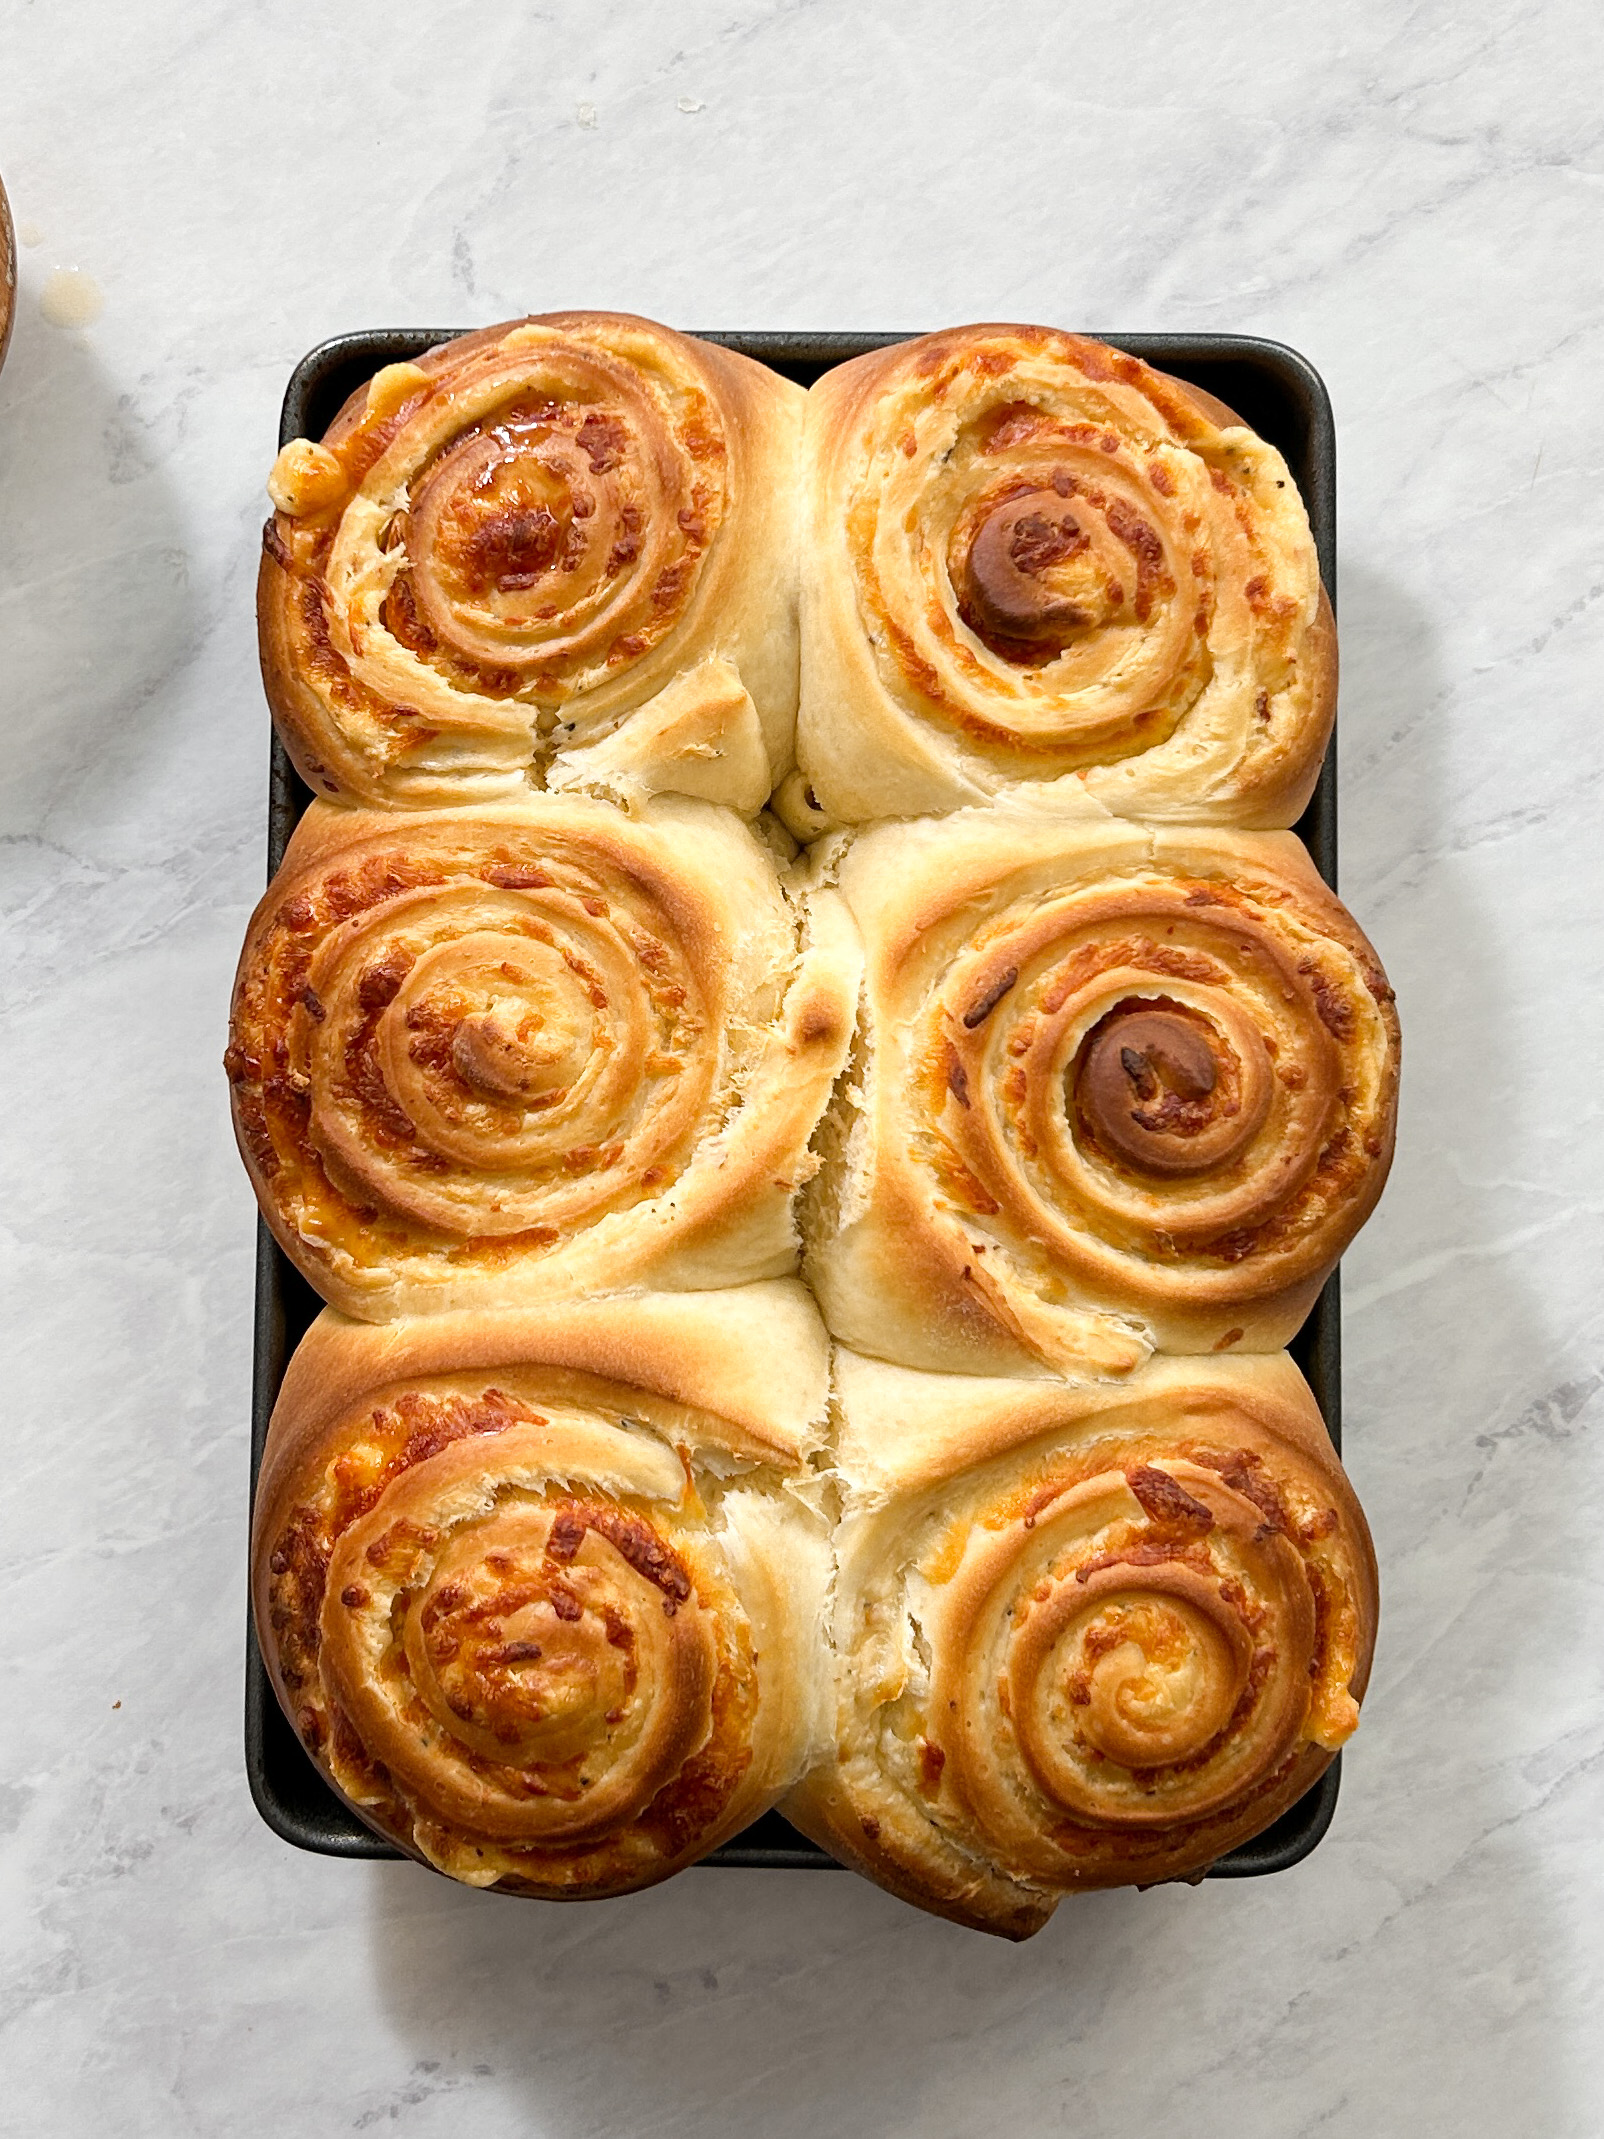 6 baked cheesy bread rolls in a small sheet pan. rolls are soft, filled with cheese, and golden